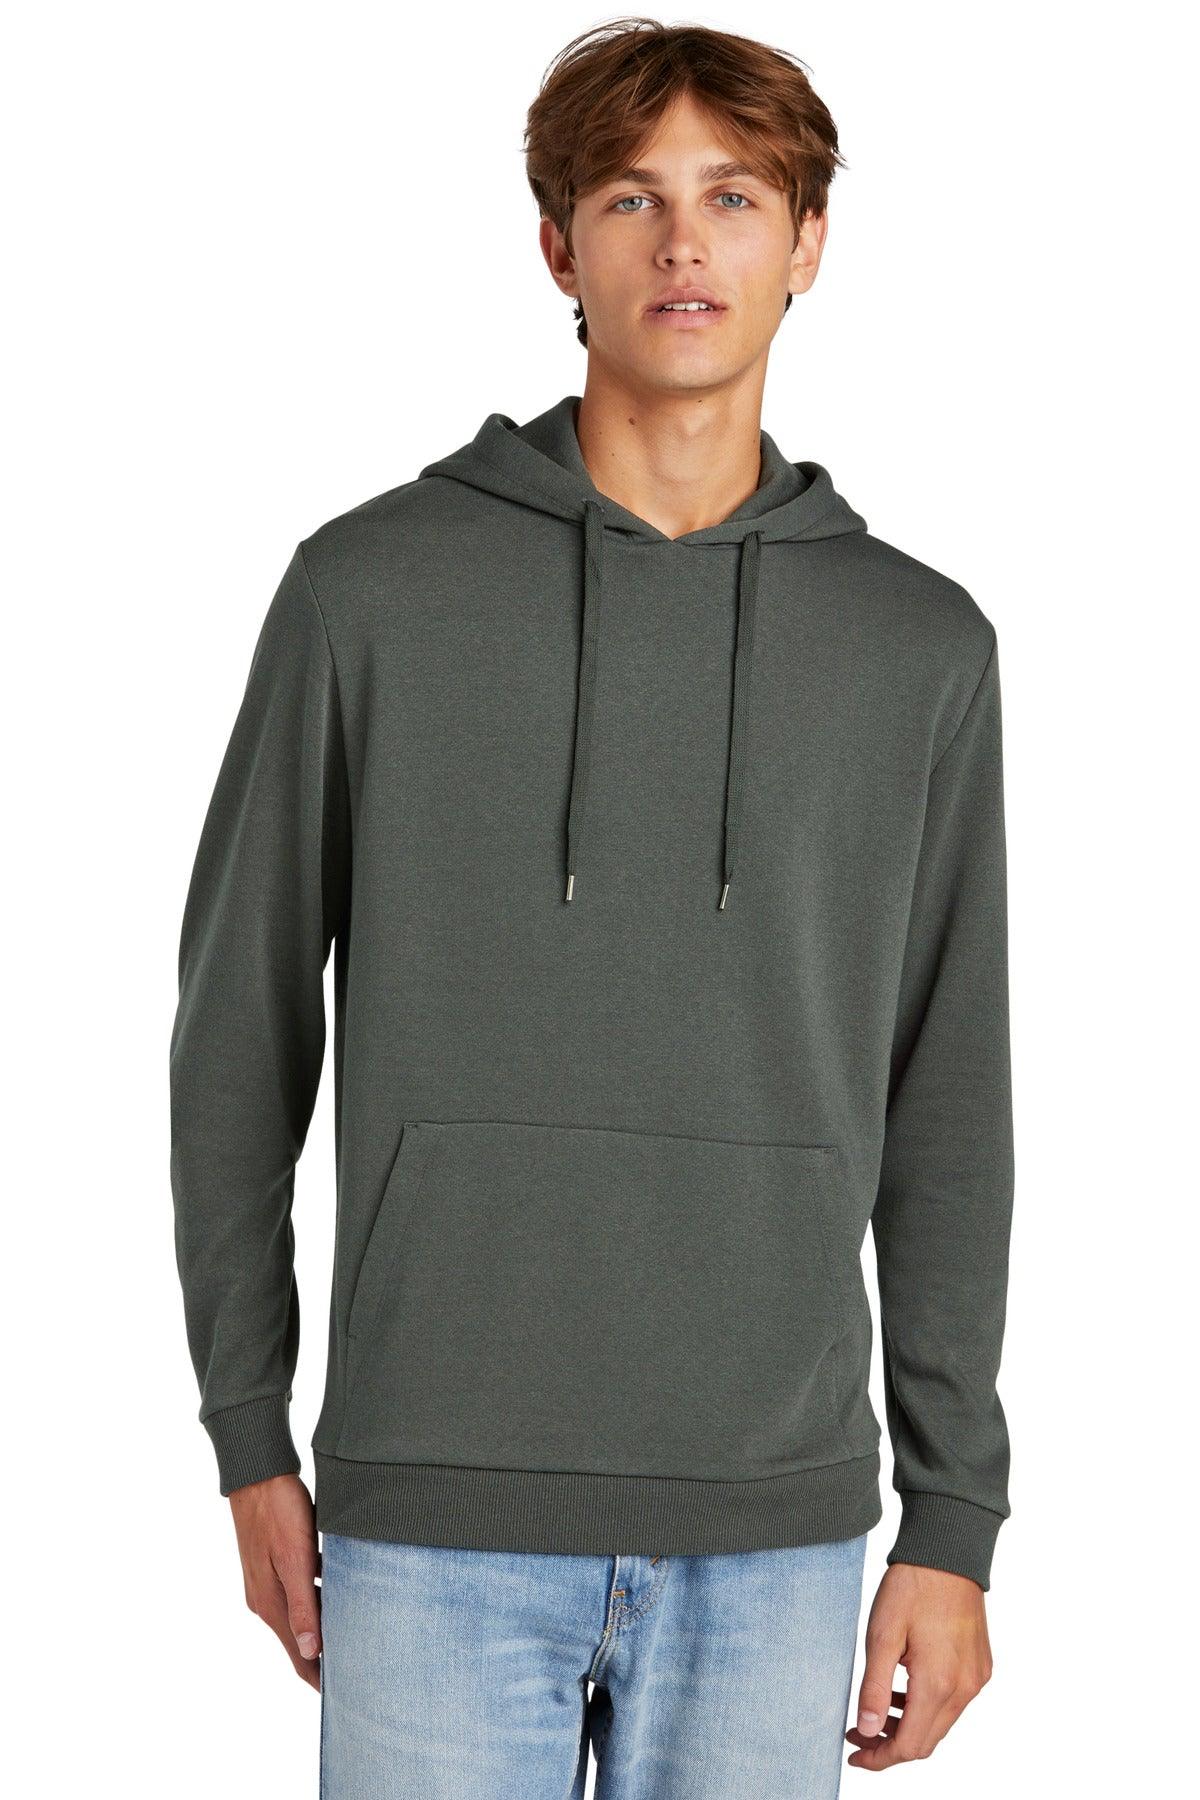 District Perfect Tri Fleece Pullover Hoodie DT1300 - Dresses Max